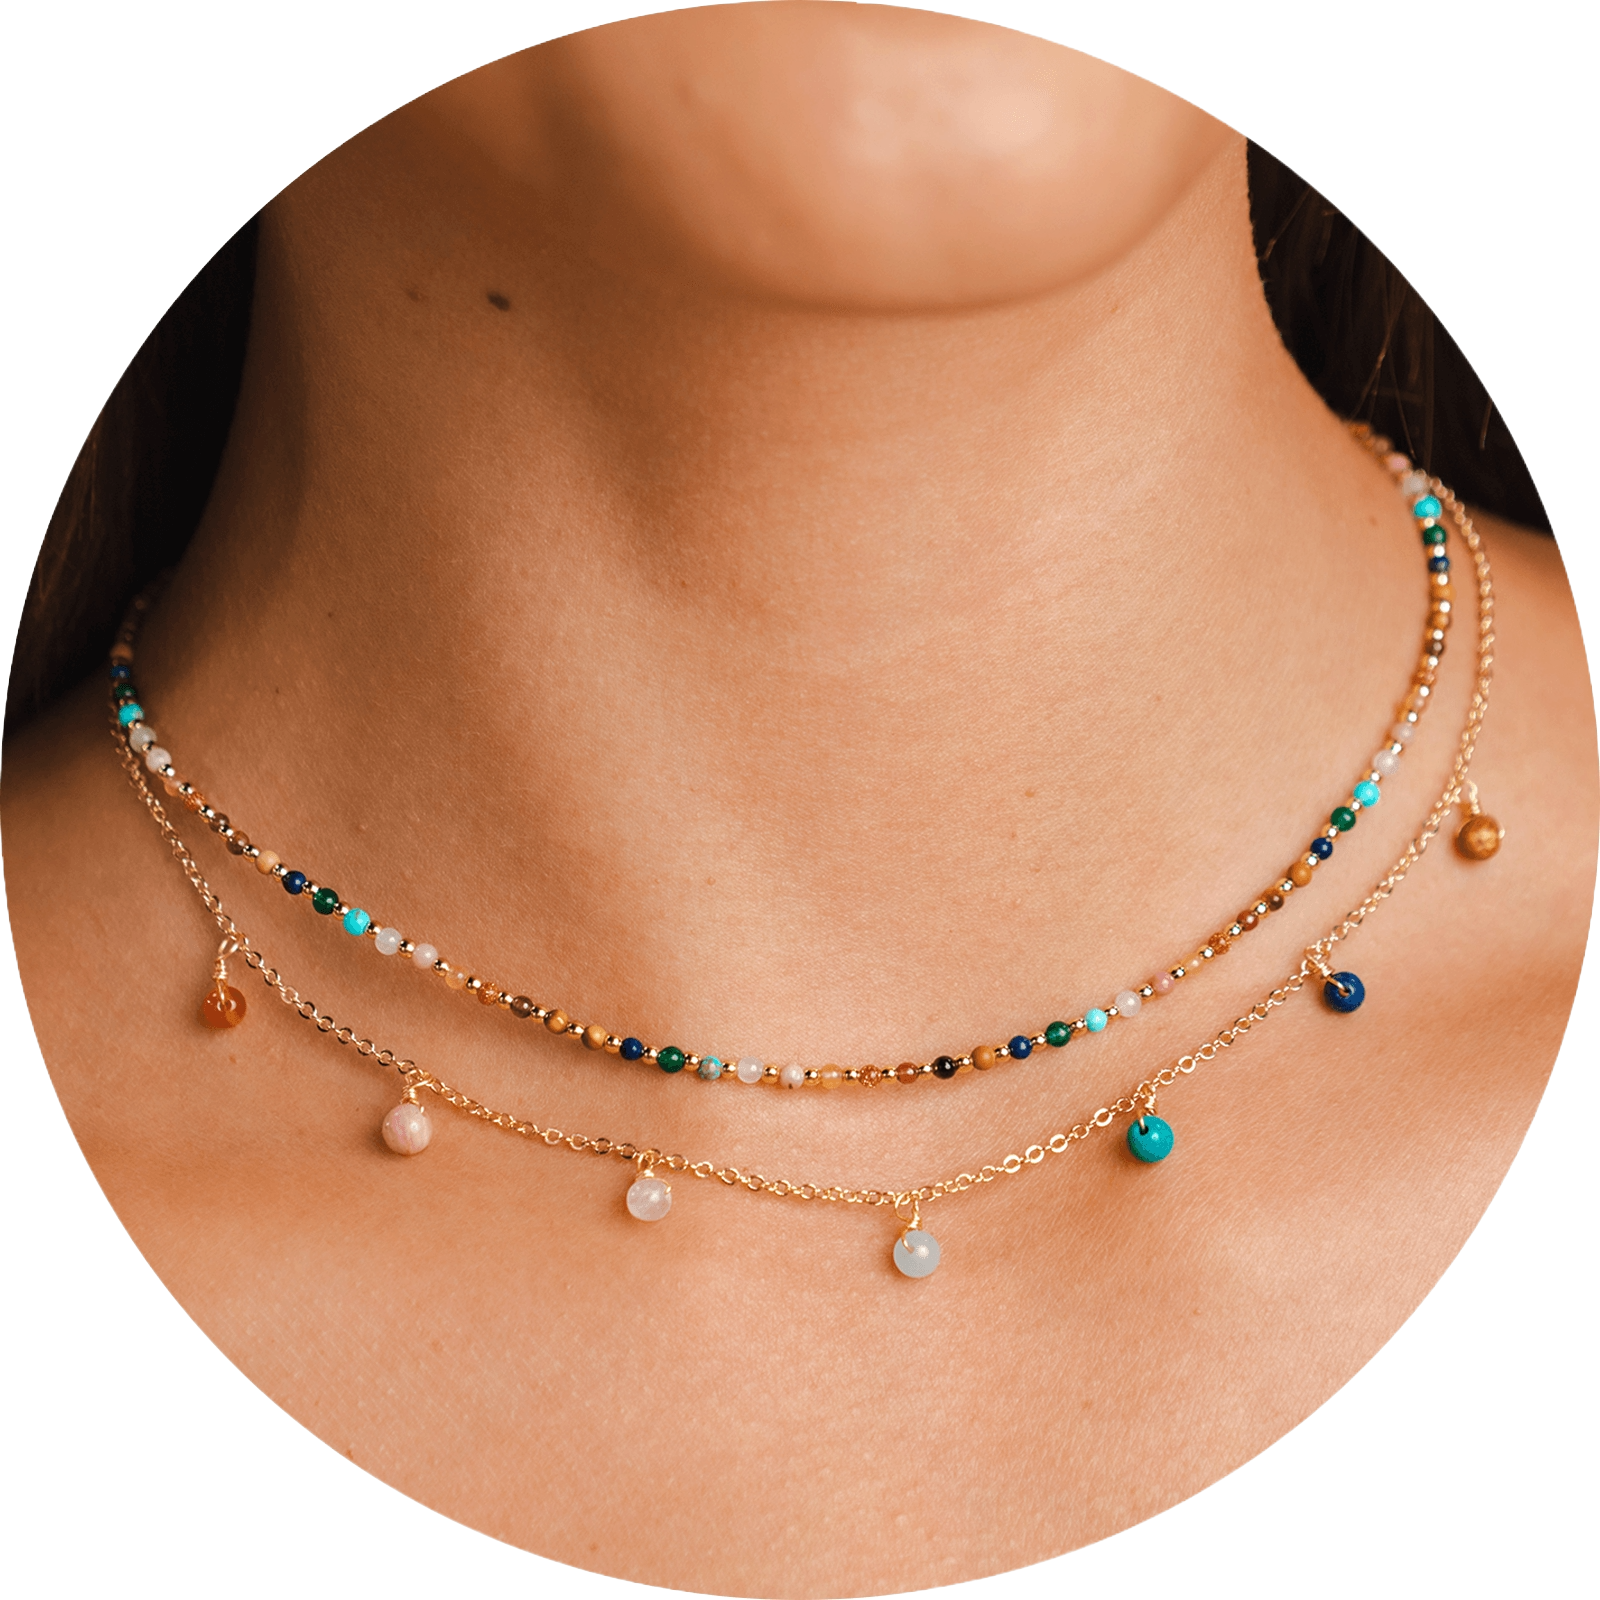 Necklace stack with a gold chain necklace with assortment of rainbow bead dewdrop charms and a 2mm assorted rainbow stone and gold bead necklace